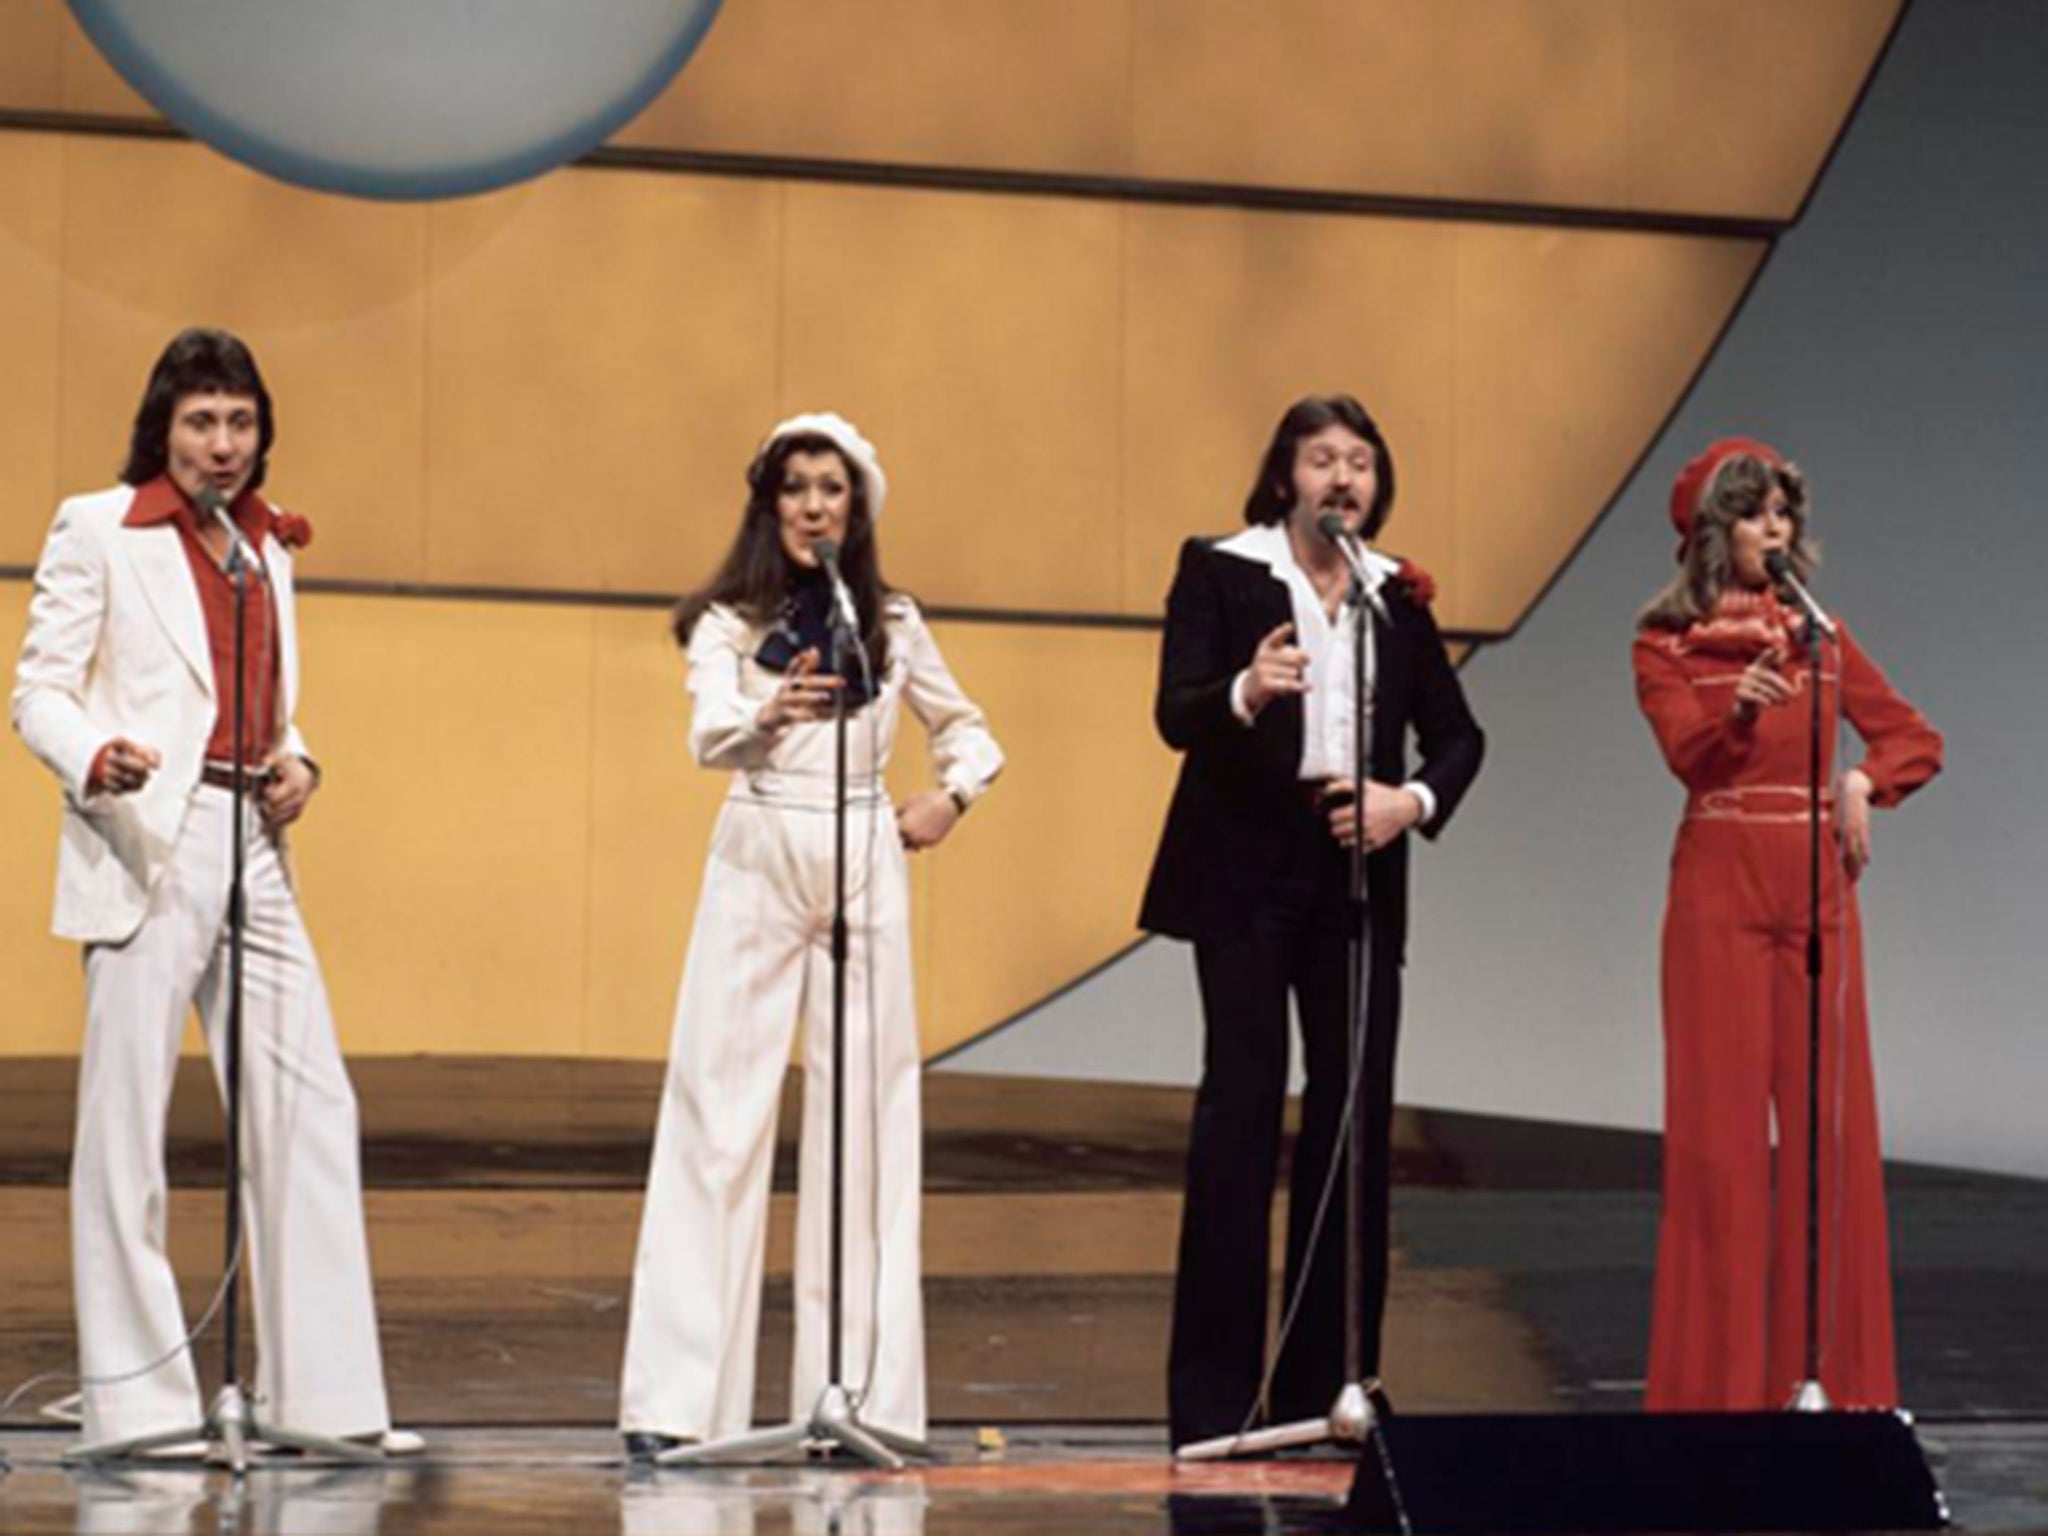 Winning with flare: Brotherhood of Man at Eurovision in 1976